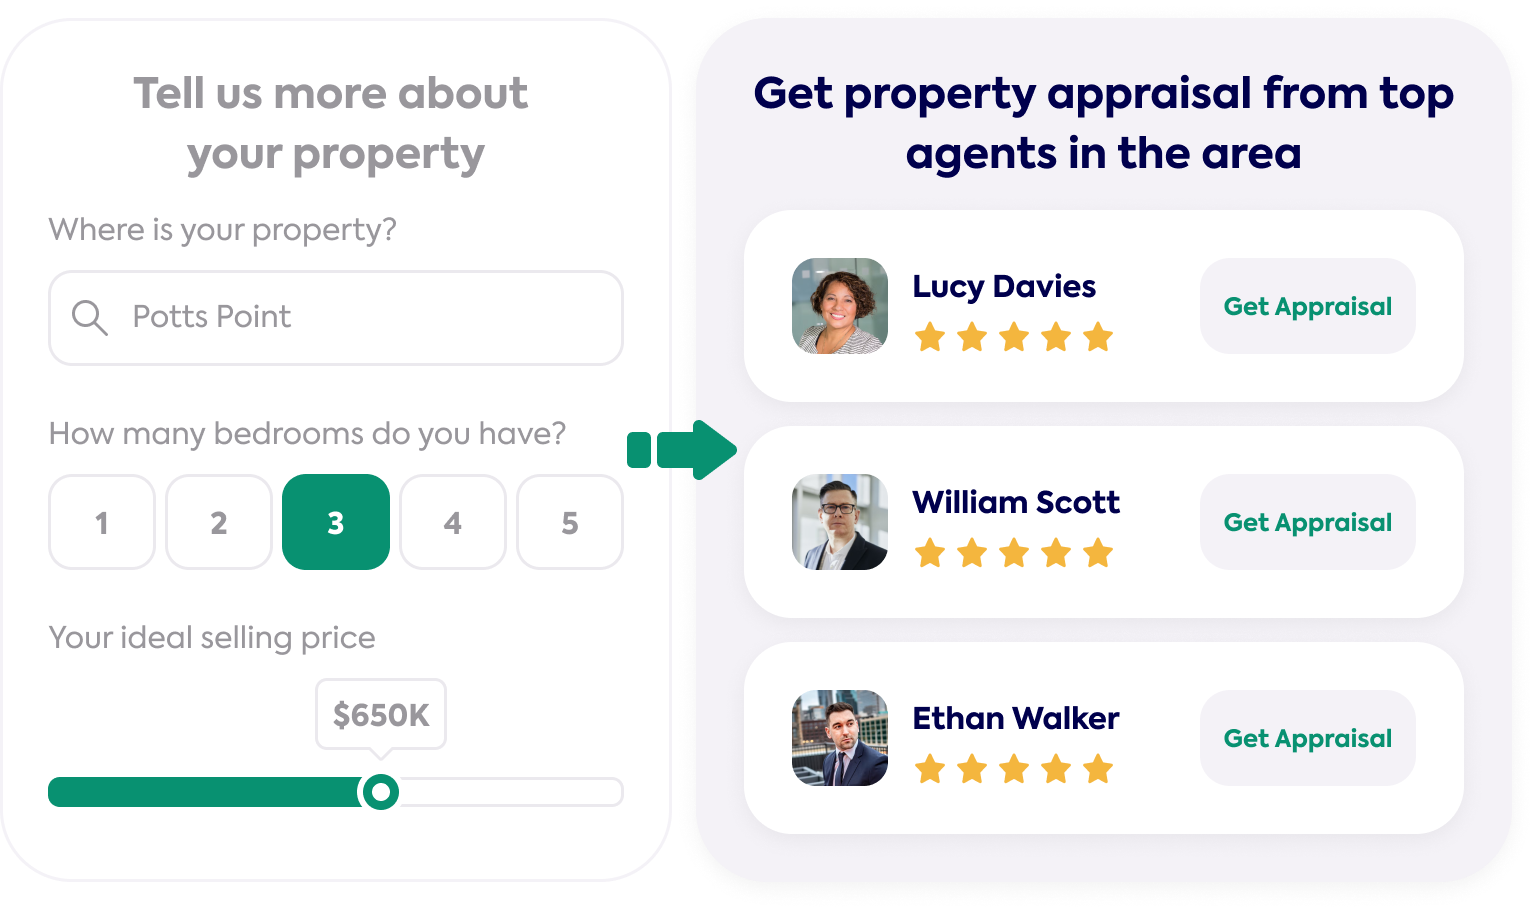 Get property appraisal from top agents in the area